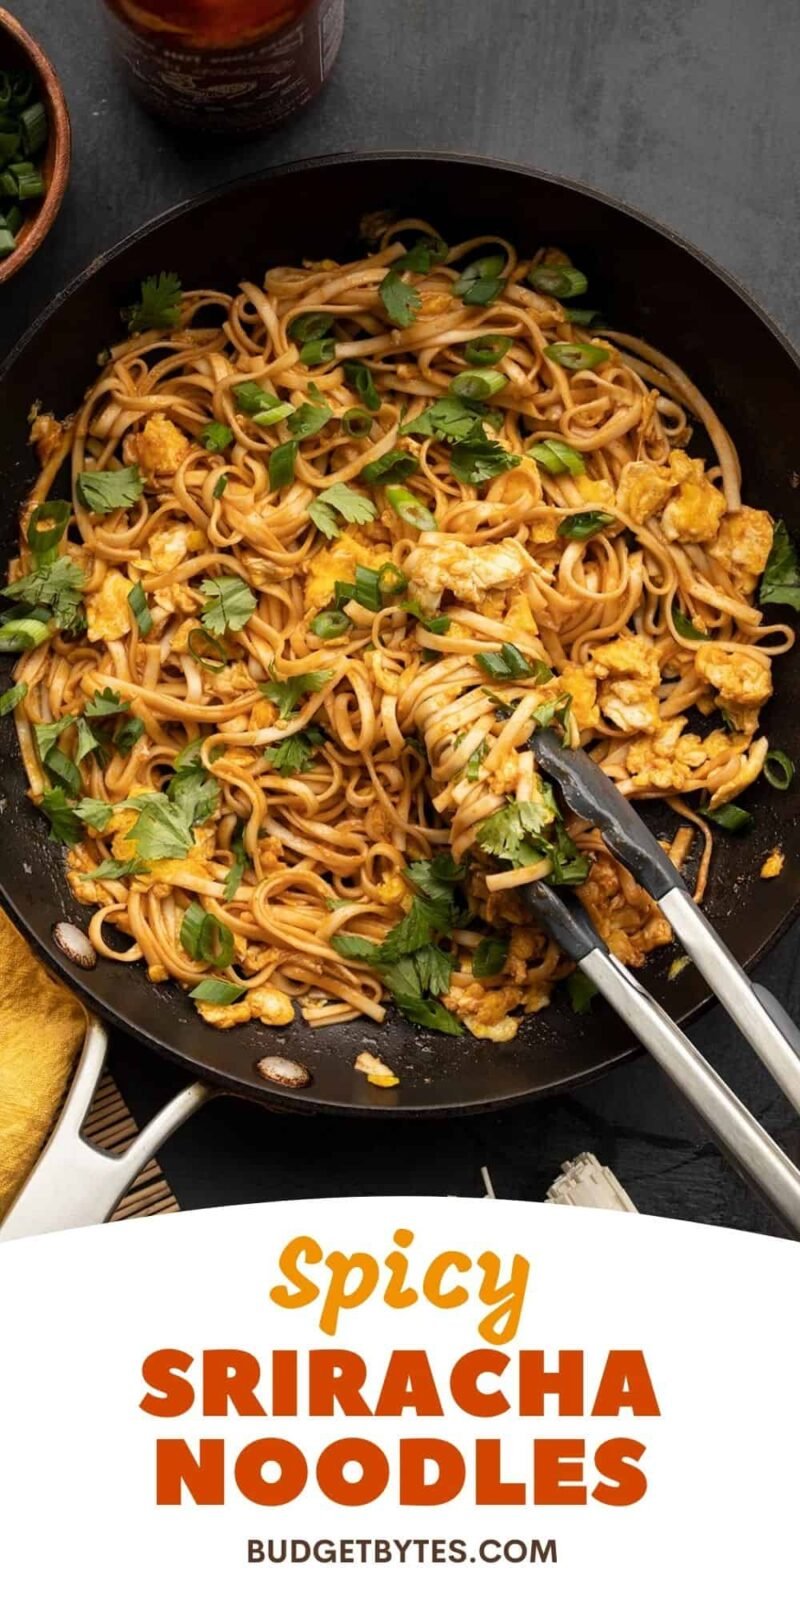 spicy sriracha noodles in a skillet, title text at the bottom